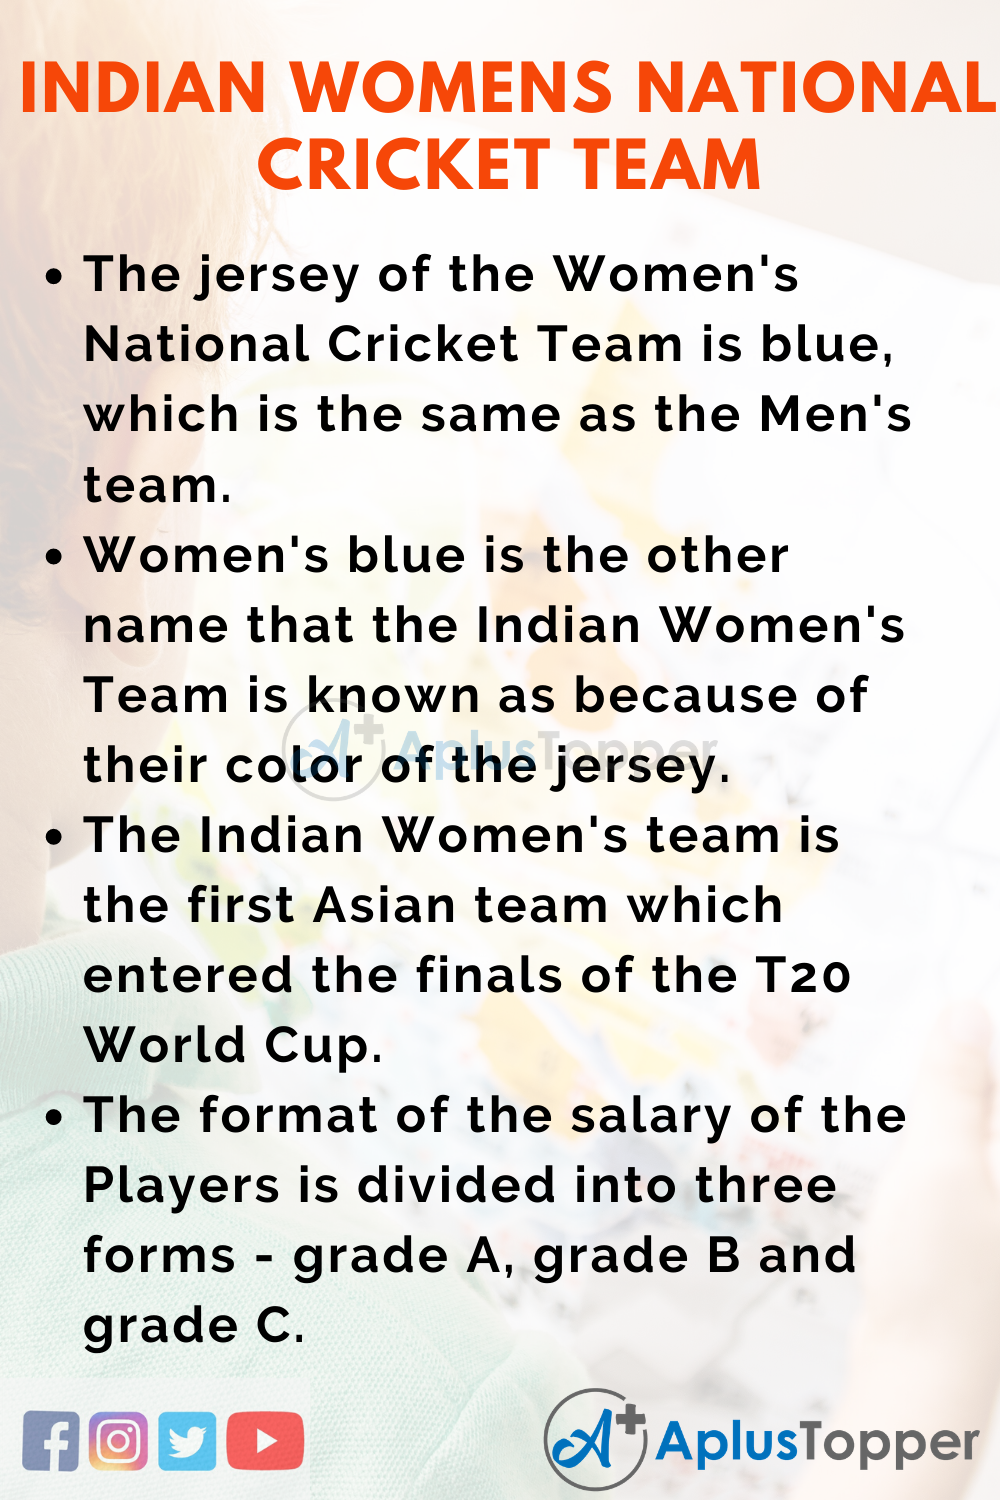 10 Lines On Indian Women's National Cricket Team for Higher Class Students